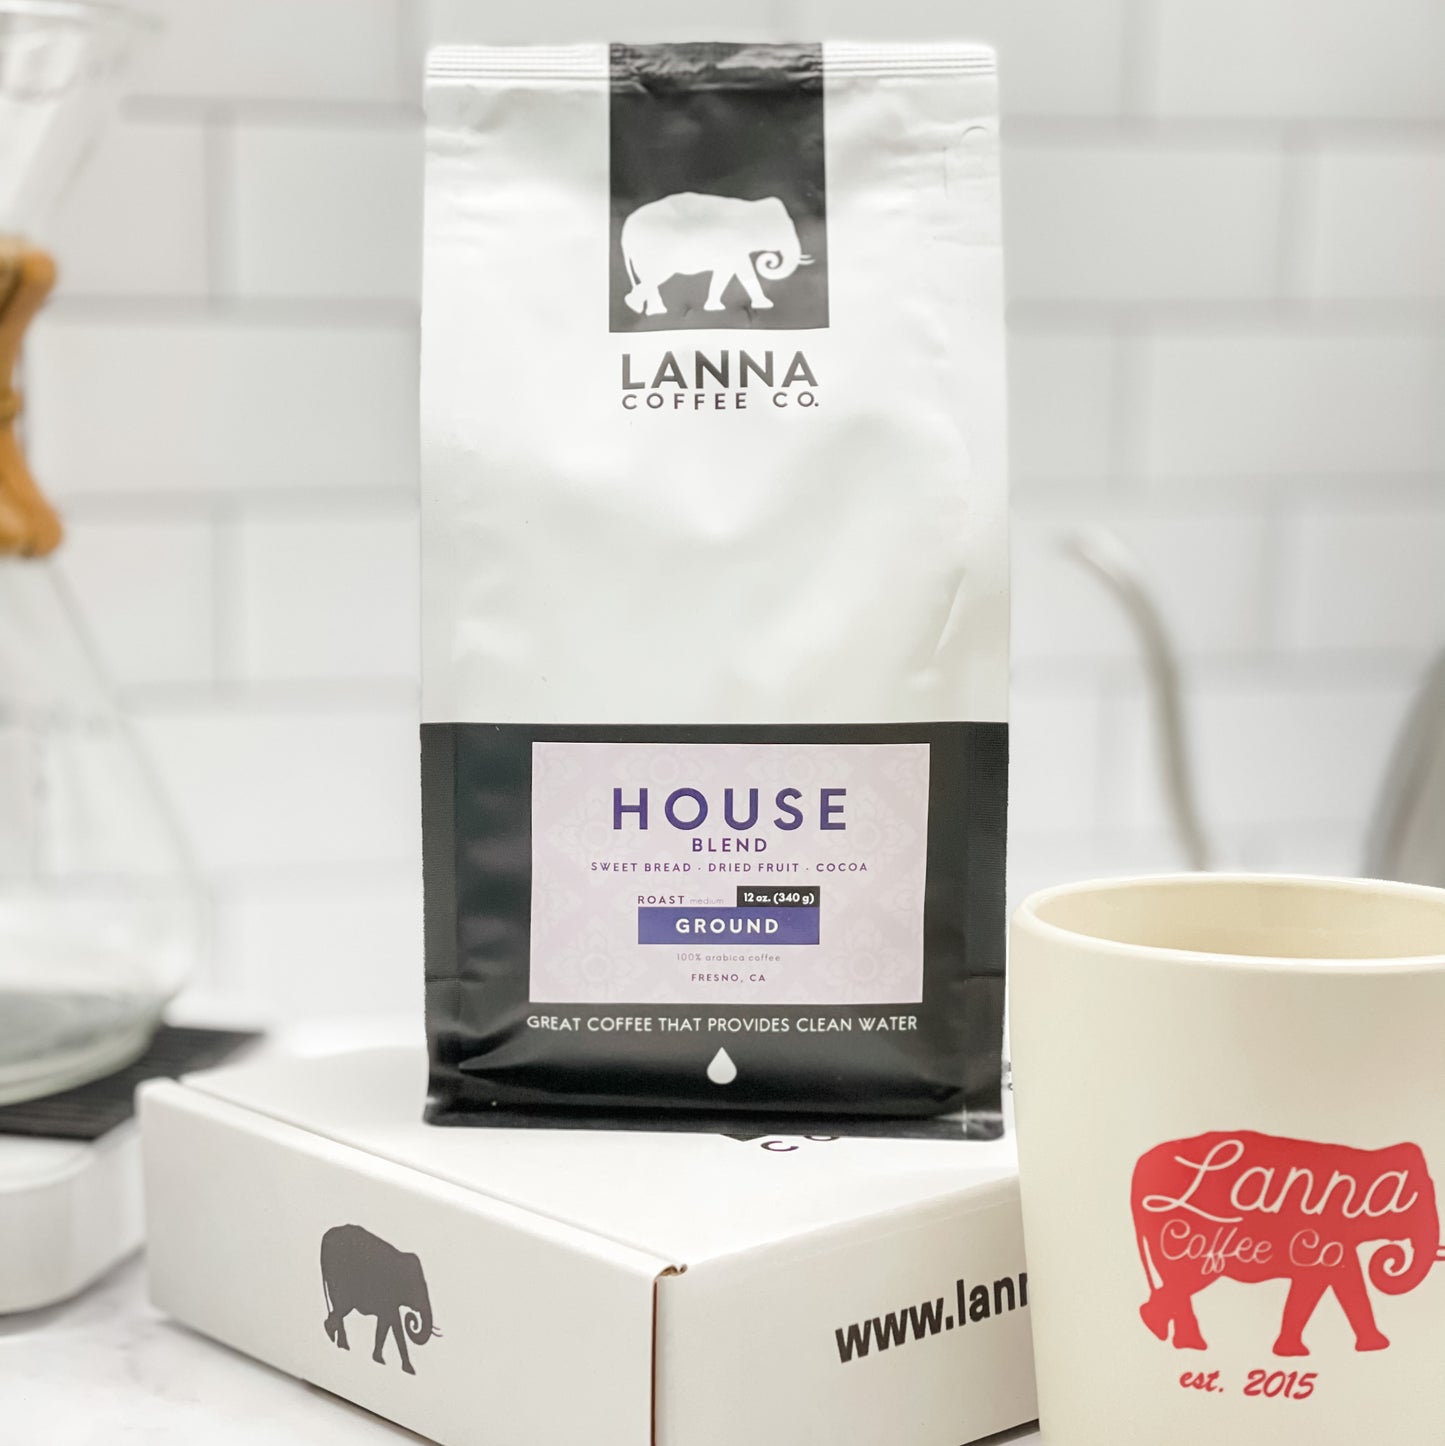 Lanna Coffee 5 ways to brew better coffee at home